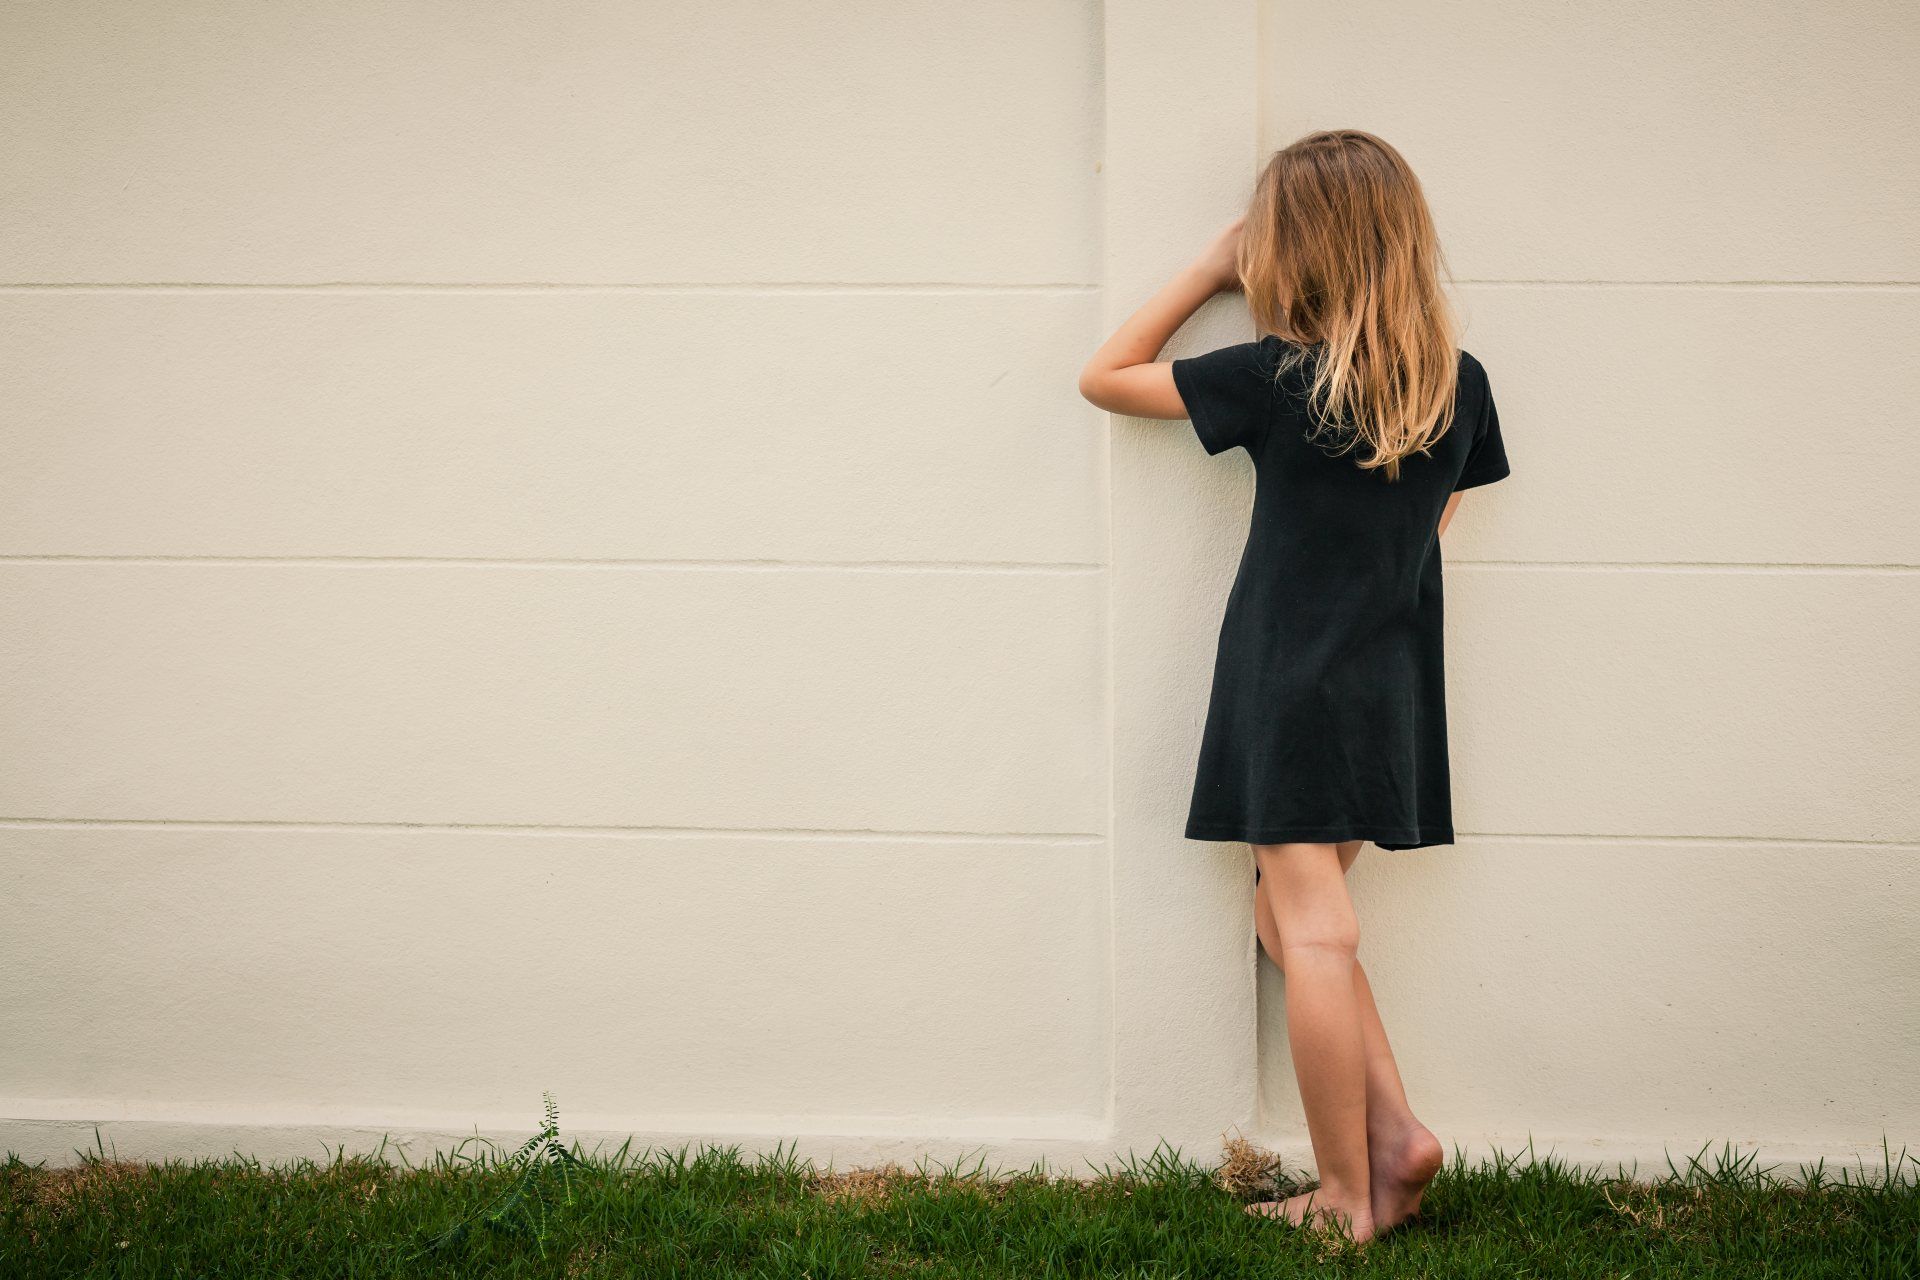 Young girl stands outdoors facing a wall - ymca